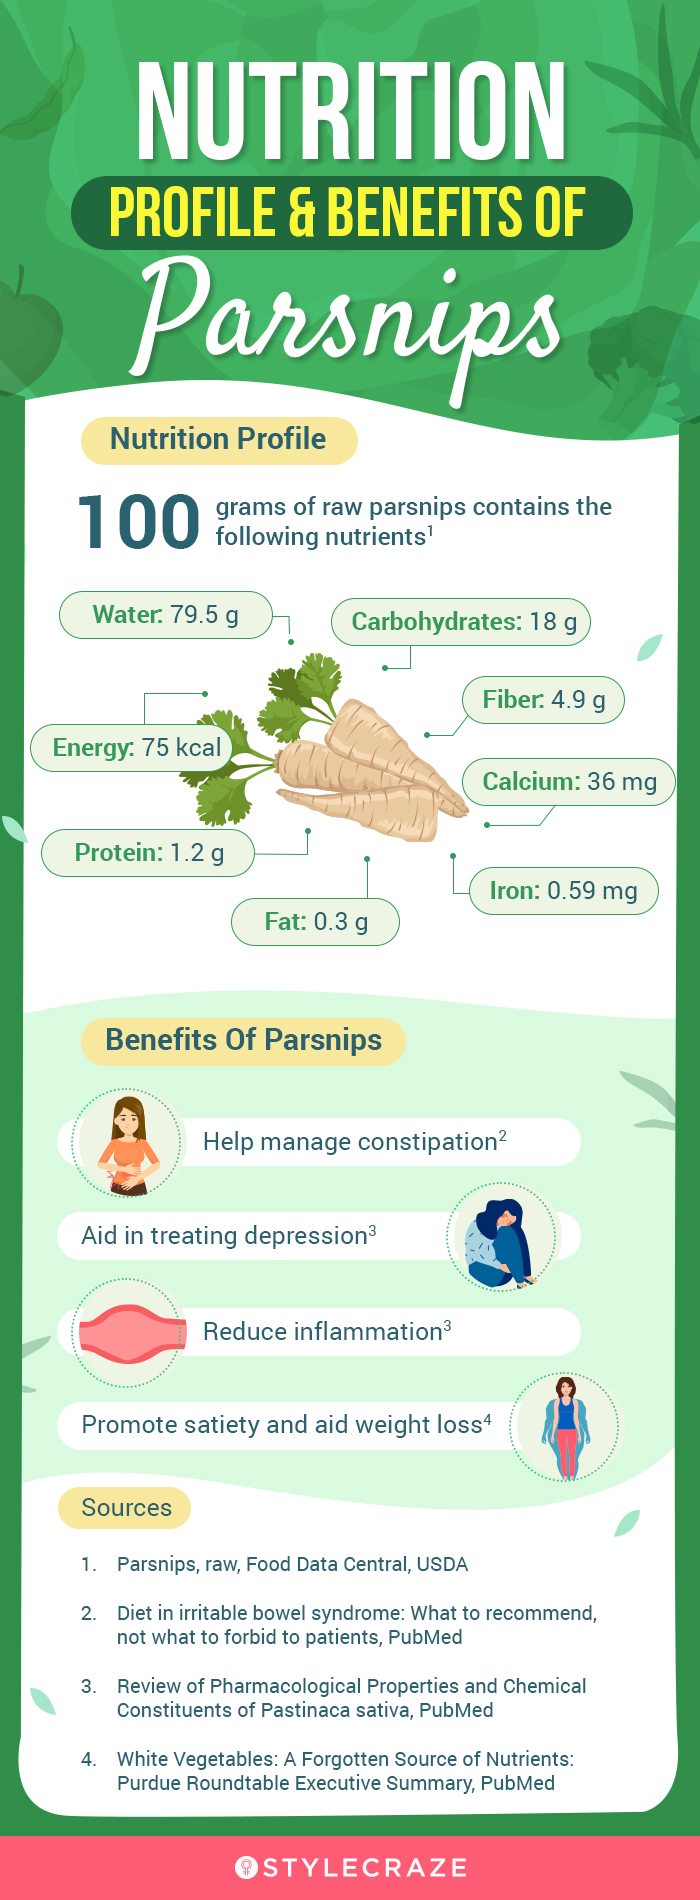 nutrition profile and benefits of parsnips [infographic]